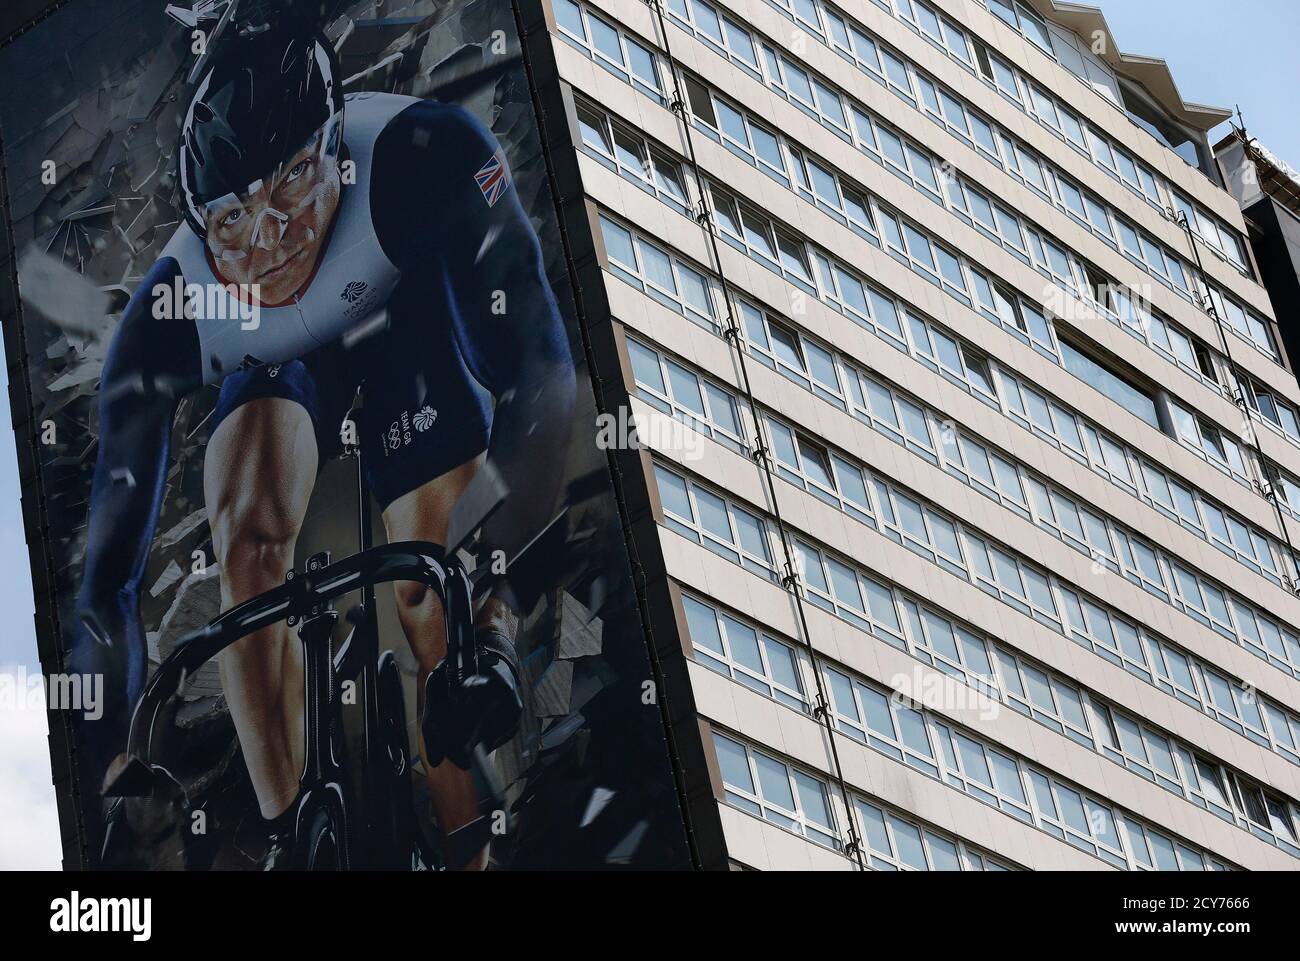 A giant poster of British cyclist Chris Hoy hangs on the side of a tower block in Stratford, London July 25, 2012.  REUTERS/Phil Noble (BRITAIN - Tags: SPORT CYCLING OLYMPICS CITYSPACE) Stock Photo